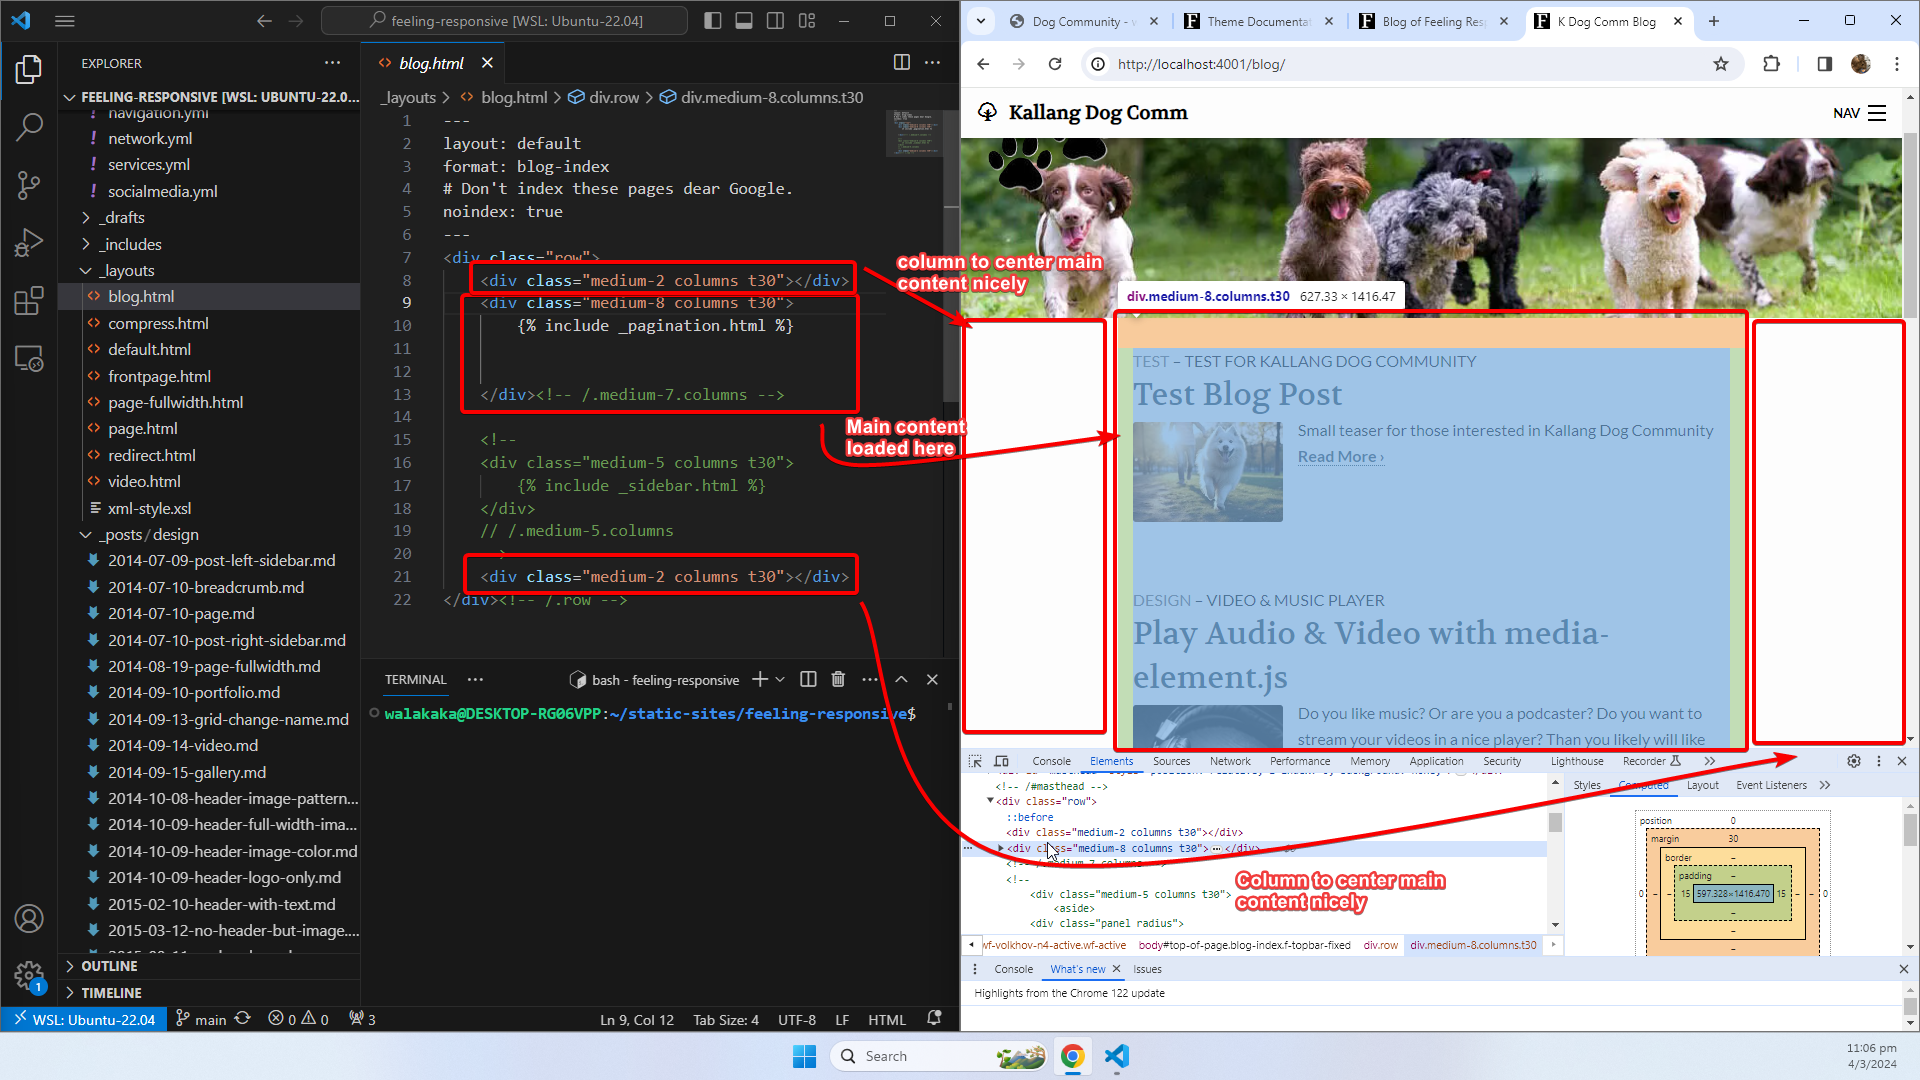 image showing the blog layout udpated to remove sidebar